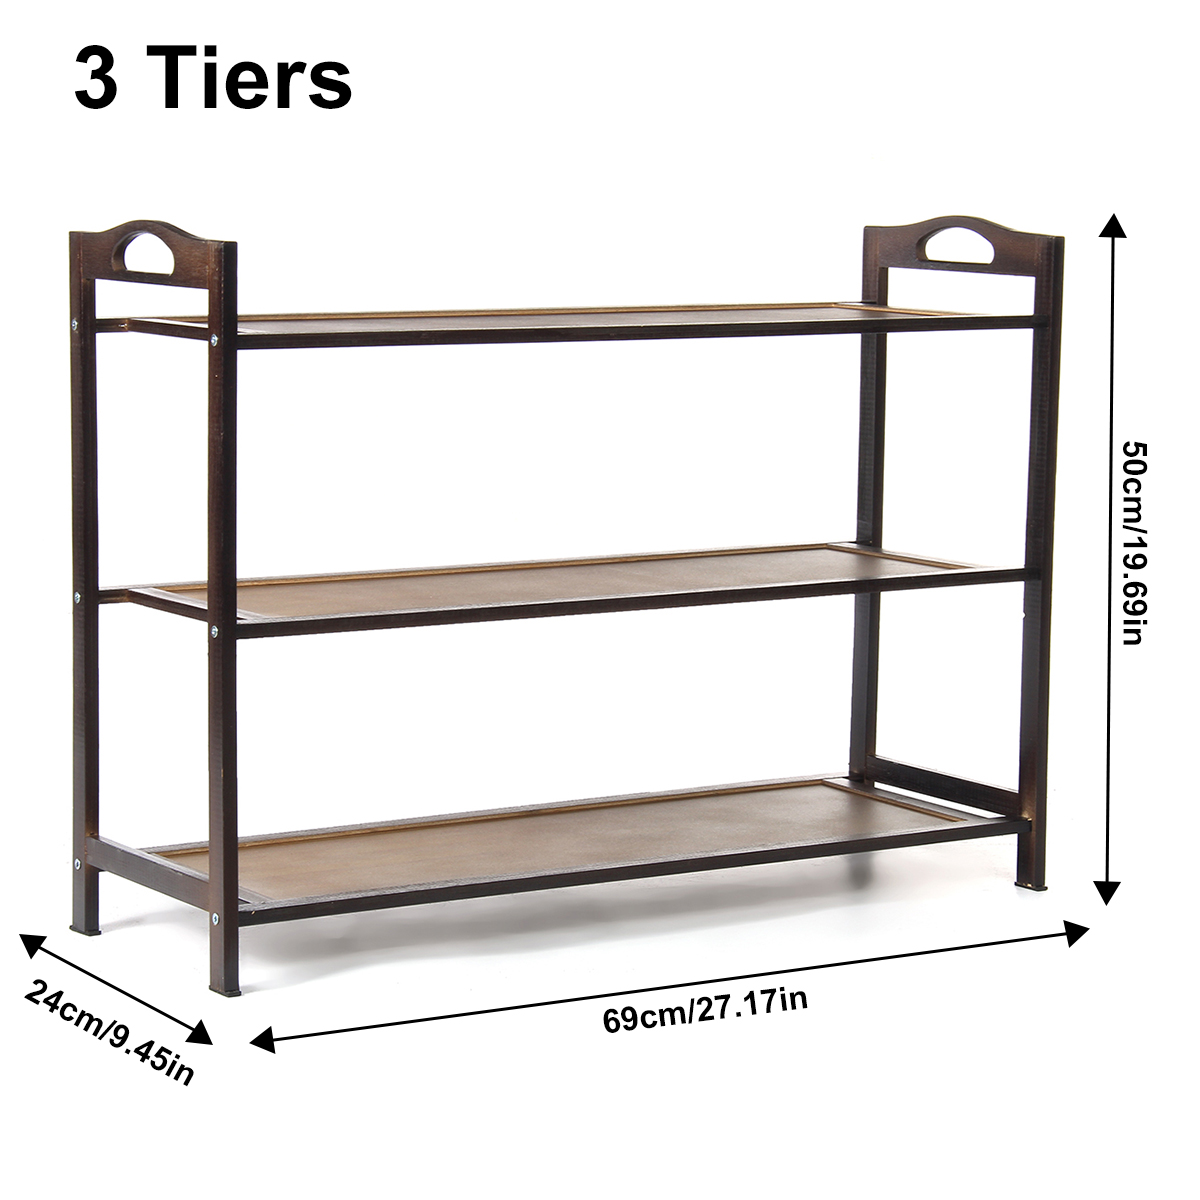 3456-Tiers-Shoe-Rack-Multi-layers-Storage-Shelf-Space-Saving-Organizer-Books-Decorations-Stand-for-H-1800948-4